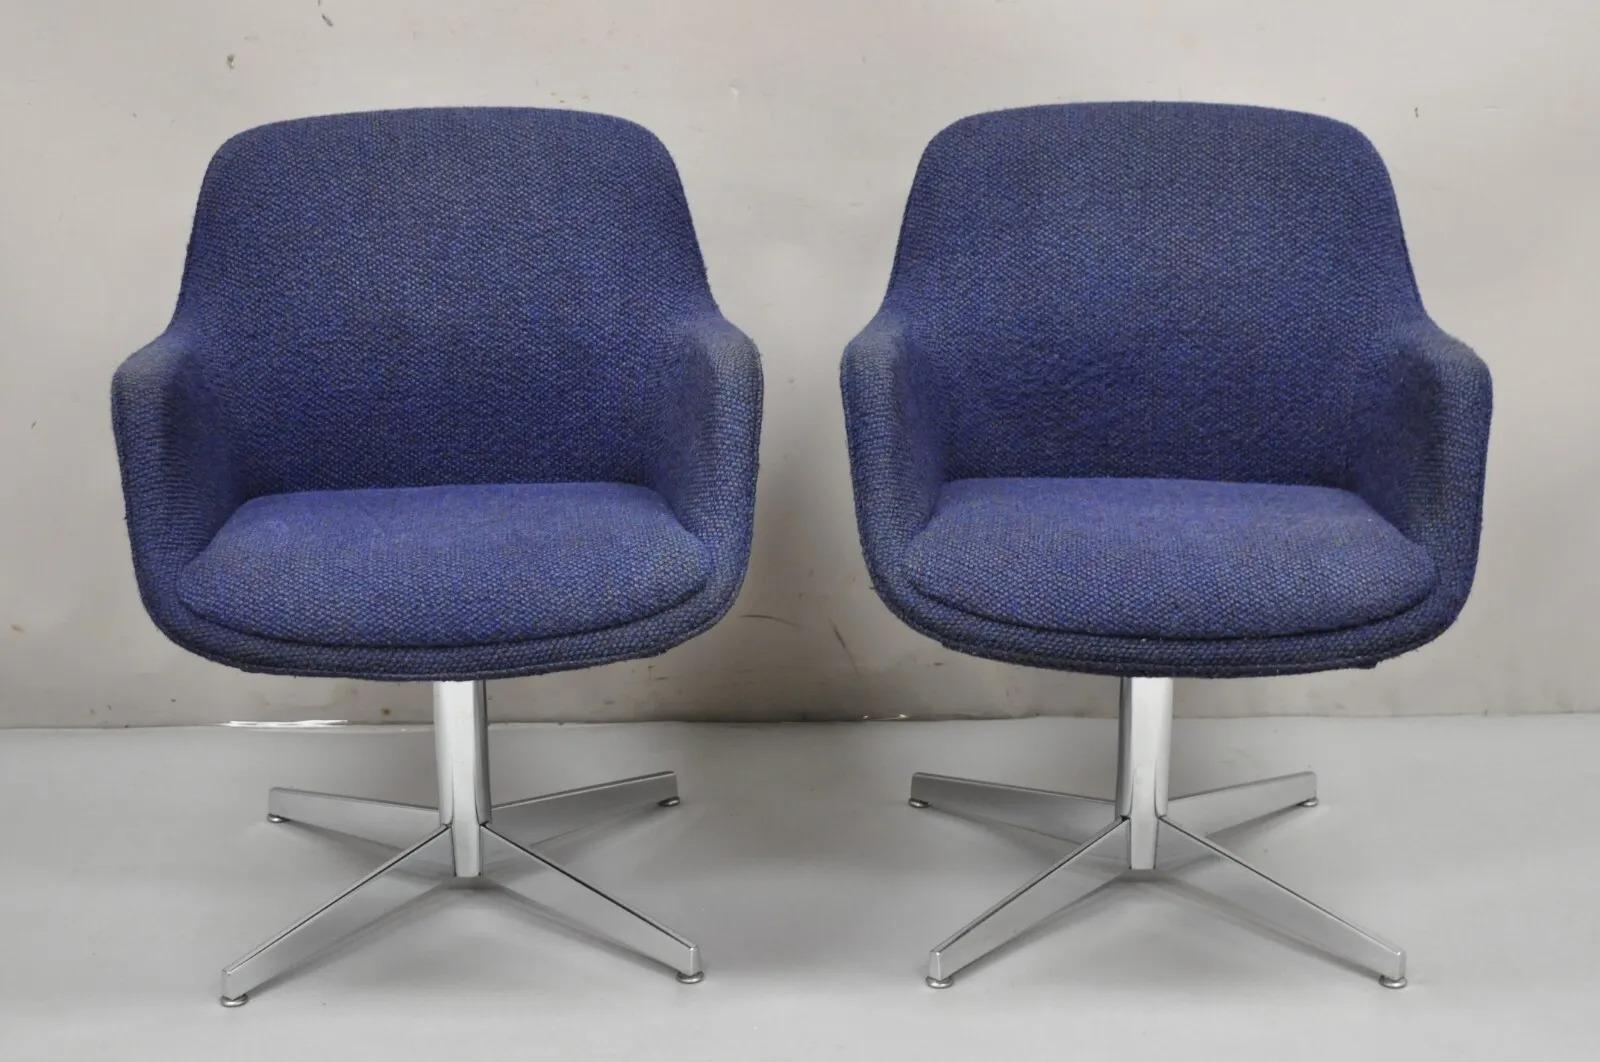 Vintage Mid Century Modern Blue Upholstered Chrome Swivel Base Club Chairs - a Pair. Item features blue knubby wool upholstery, chrome swivel base, clean Modernist lines, very nice vintage item. Circa Late 20th Century. Measurements: 32